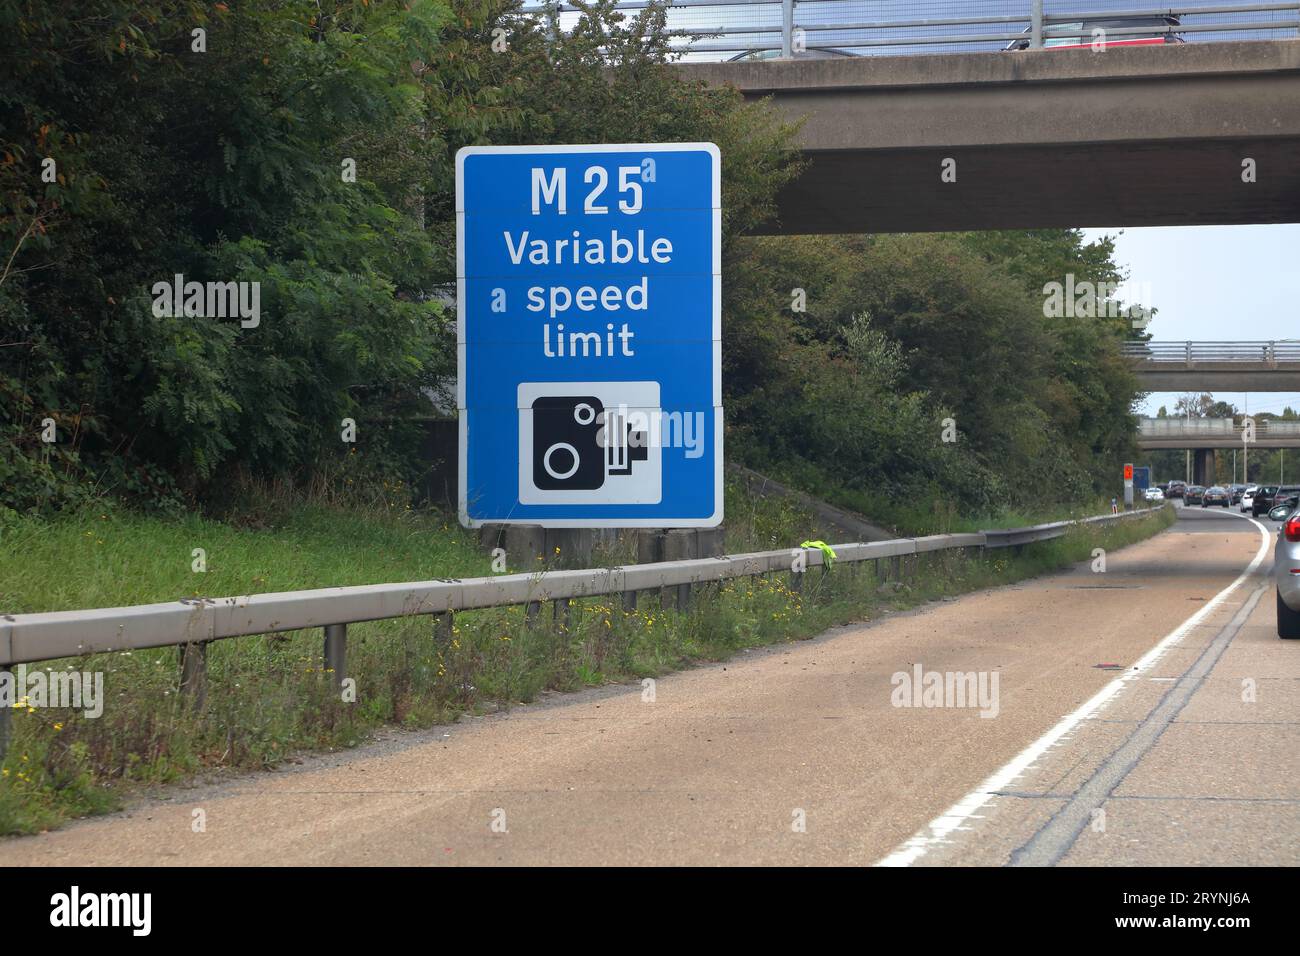 Travelling along the M25 Motorway with roadside signage indicating speed enforcement on the imposed variable speed. Stock Photo